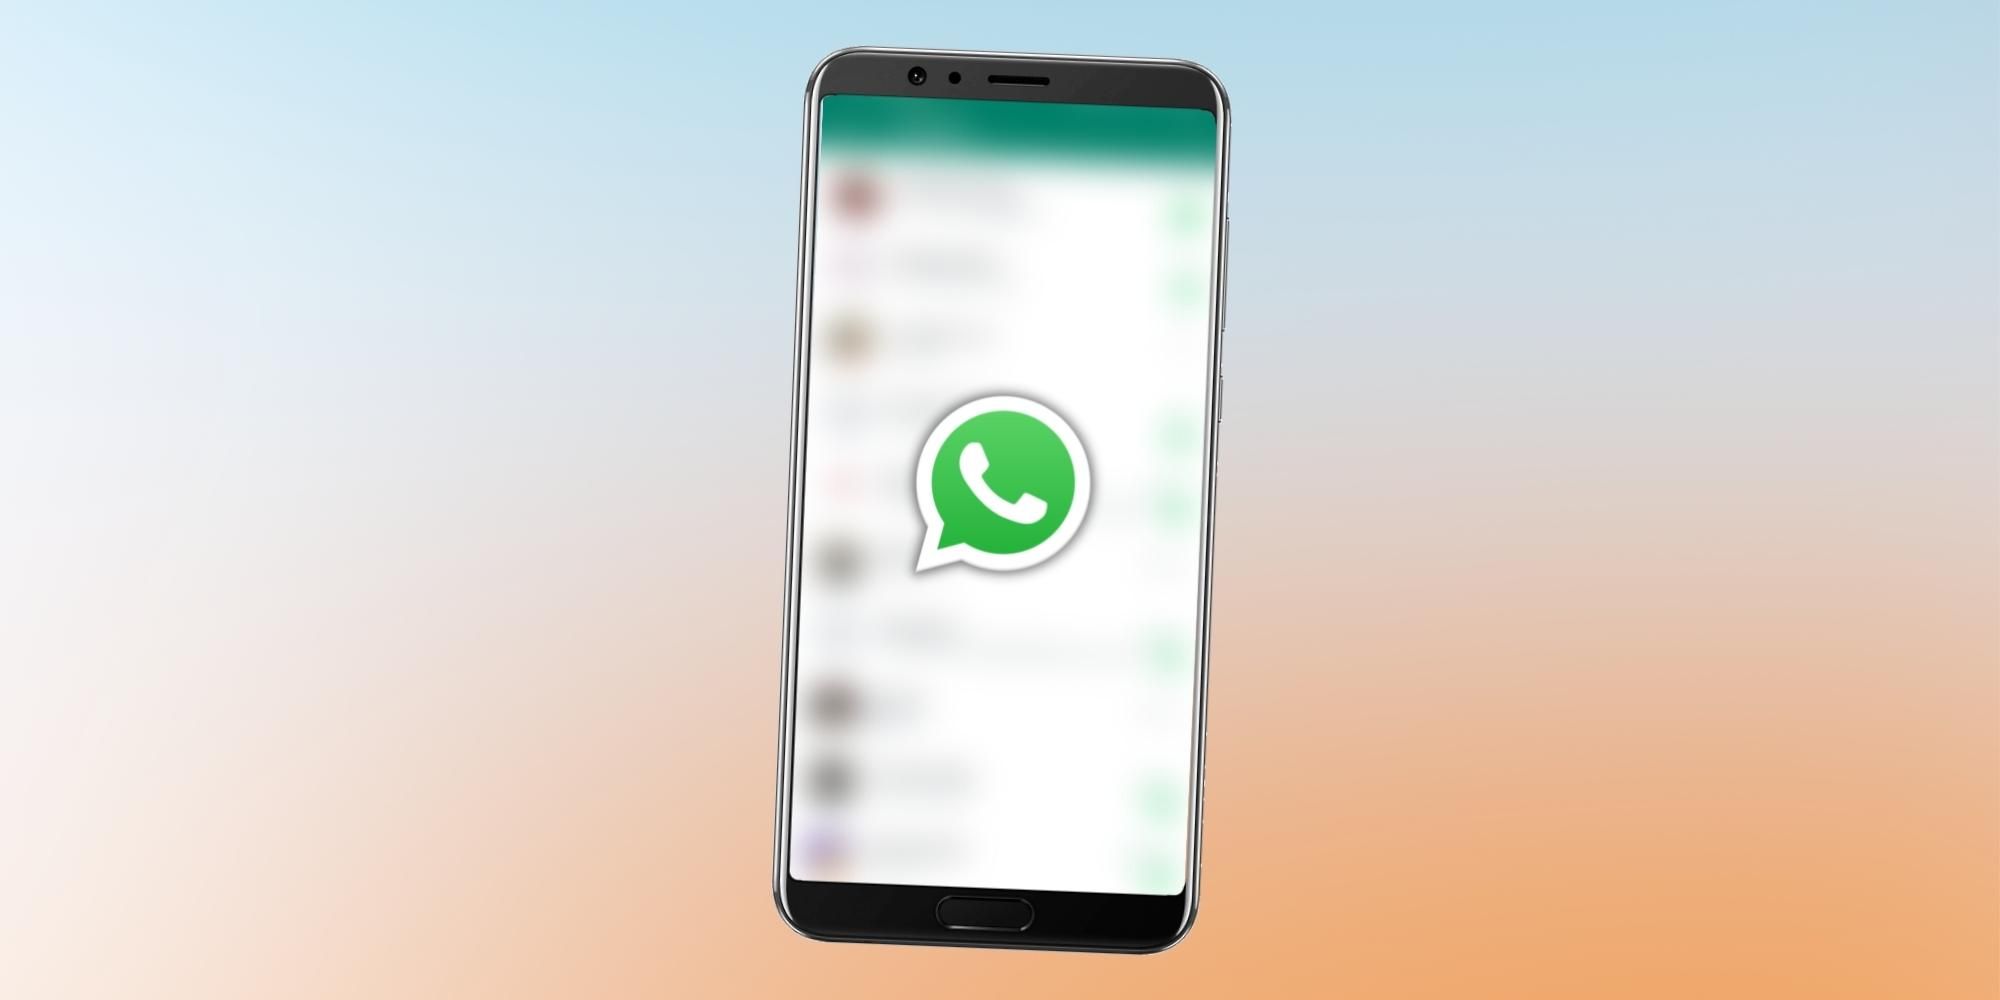 5 Ways to Edit Your Profile on WhatsApp - wikiHow